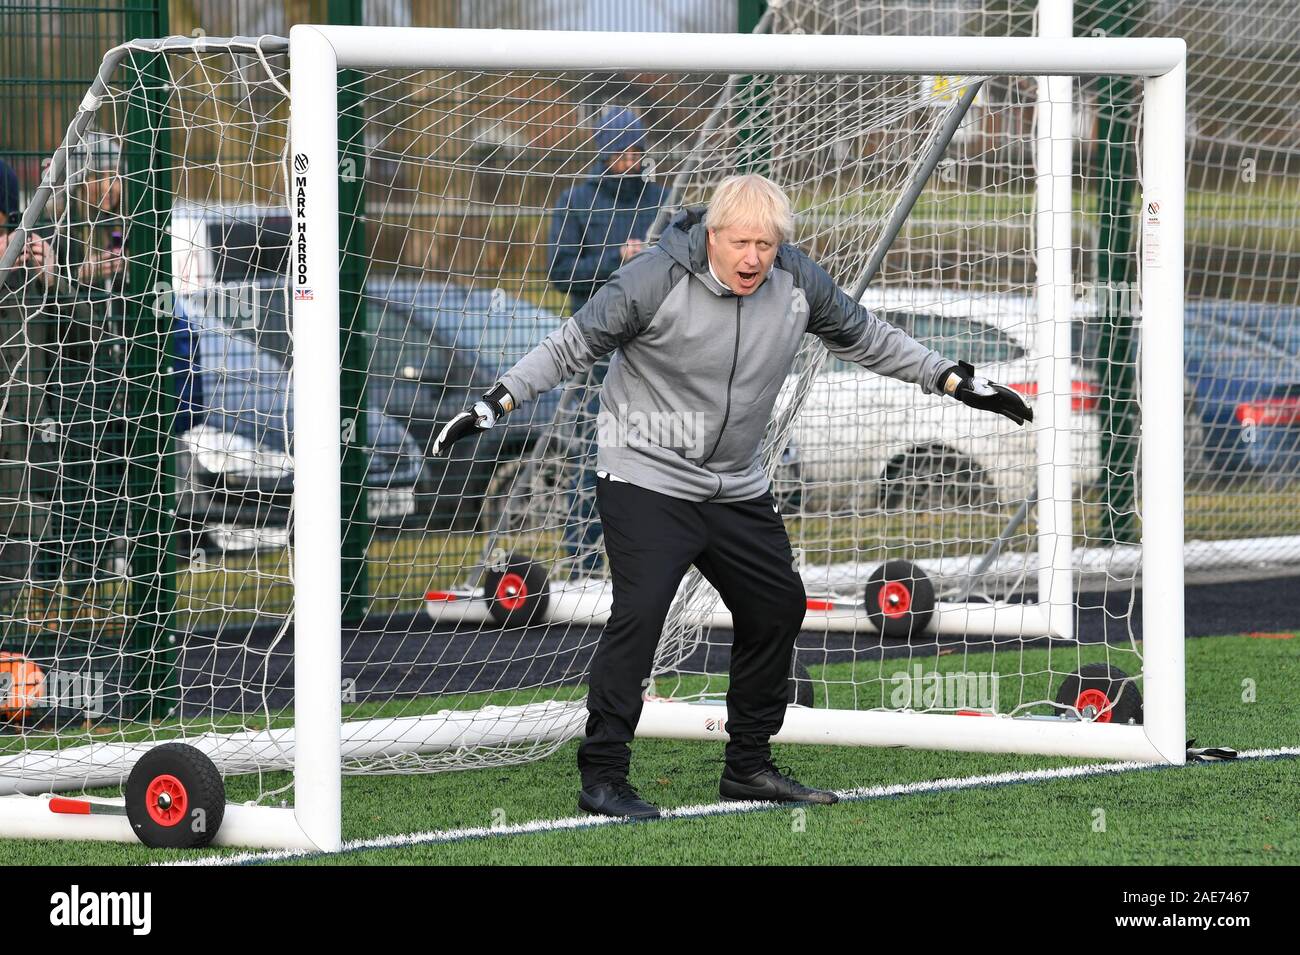 Prime Minister Boris Johnson tries his hand in goal before a football match between Hazel Grove Utd and Poynton Jnr u10s in the Cheshire Girls football league in Cheadle Hume, Cheshire, while on the election campaign trail. Stock Photo